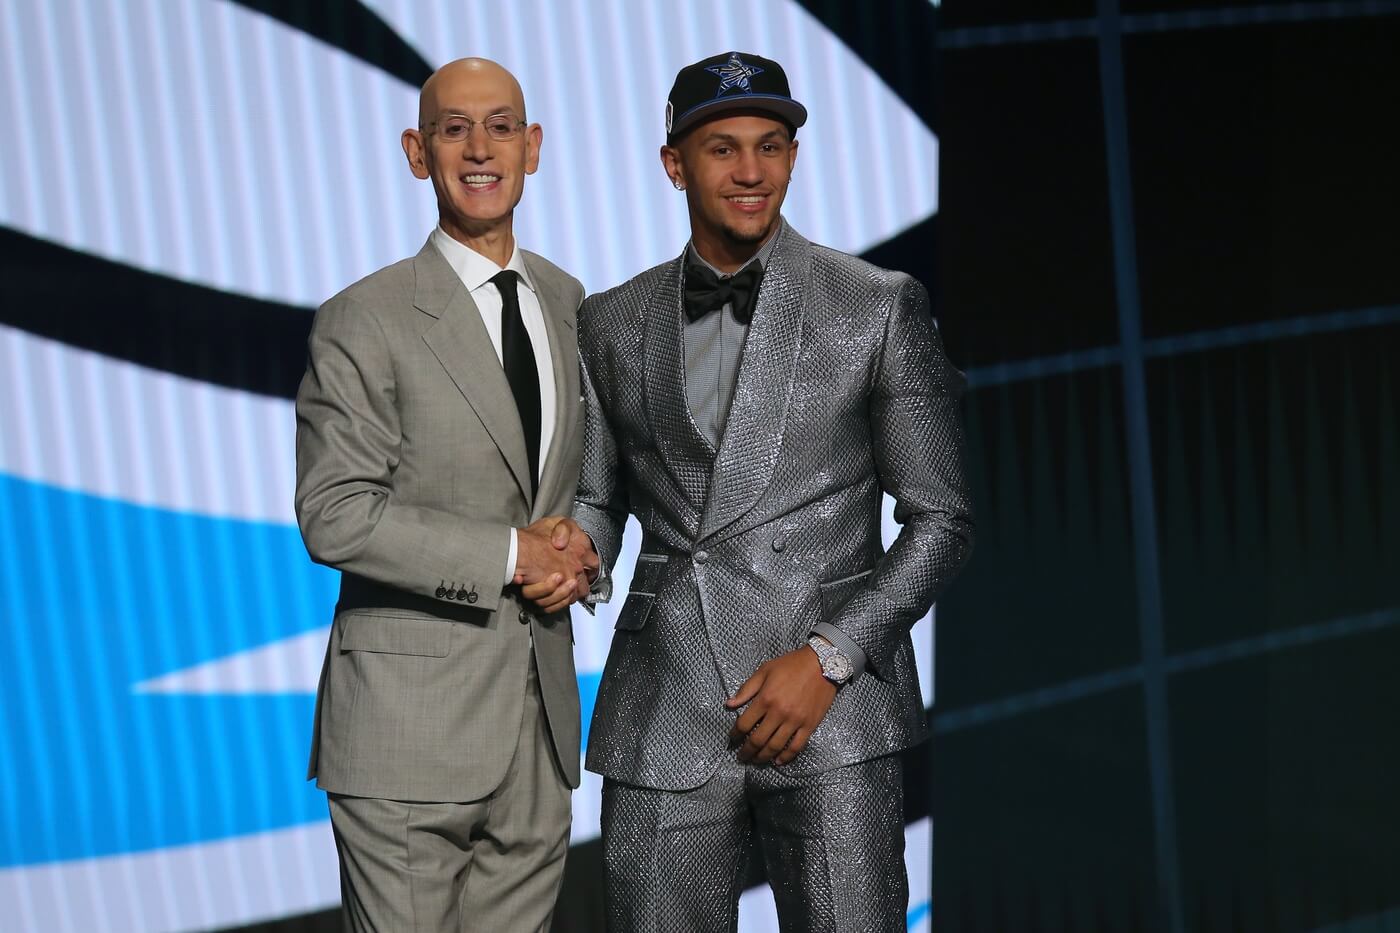 Jul 29, 2021; Brooklyn, New York, USA; Jalen Suggs (Gonzaga) poses with NBA commissioner Adam Silver after being selected as the number five overall pick by the Orlando Magic in the first round of the 2021 NBA Draft at Barclays Center. Mandatory Credit: Brad Penner-USA TODAY Sports